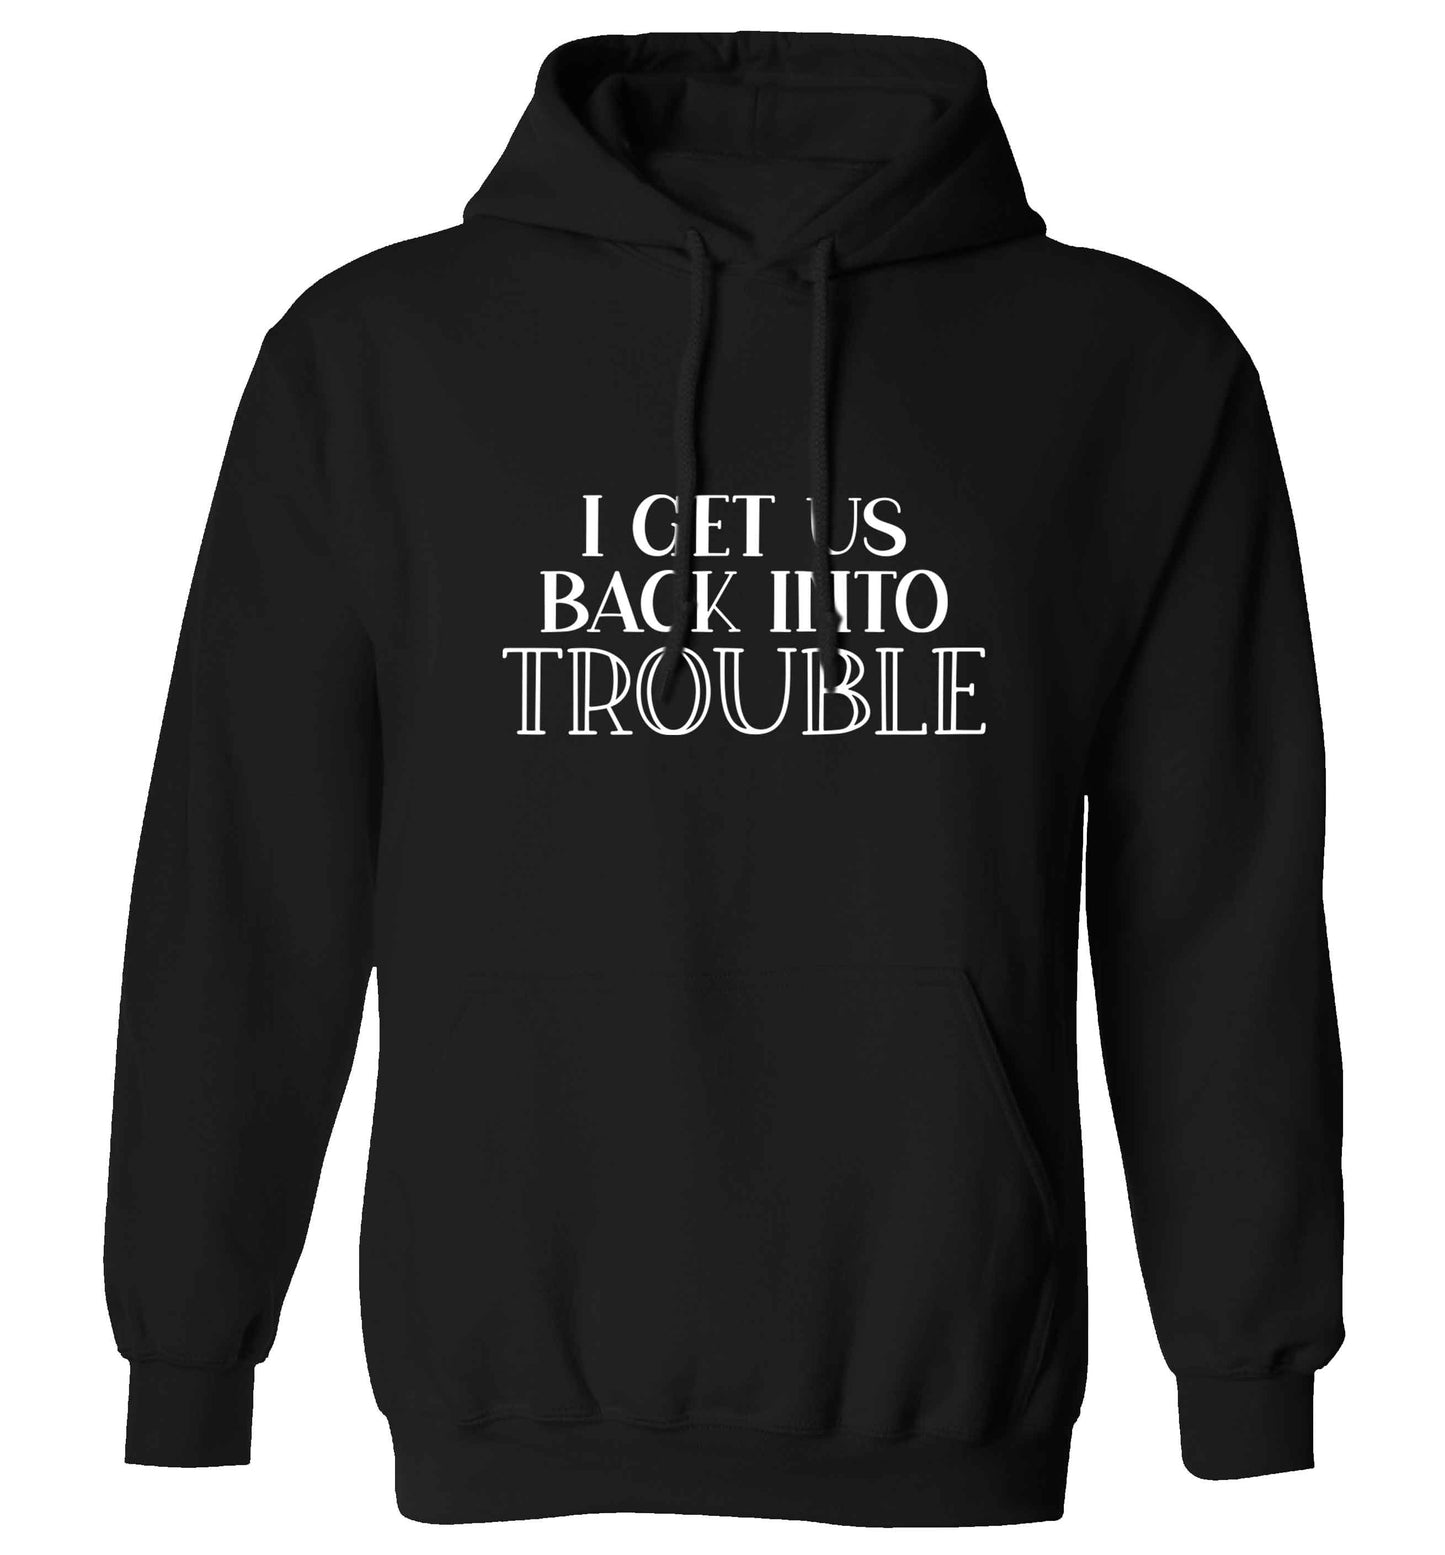 I get us back into trouble adults unisex black hoodie 2XL